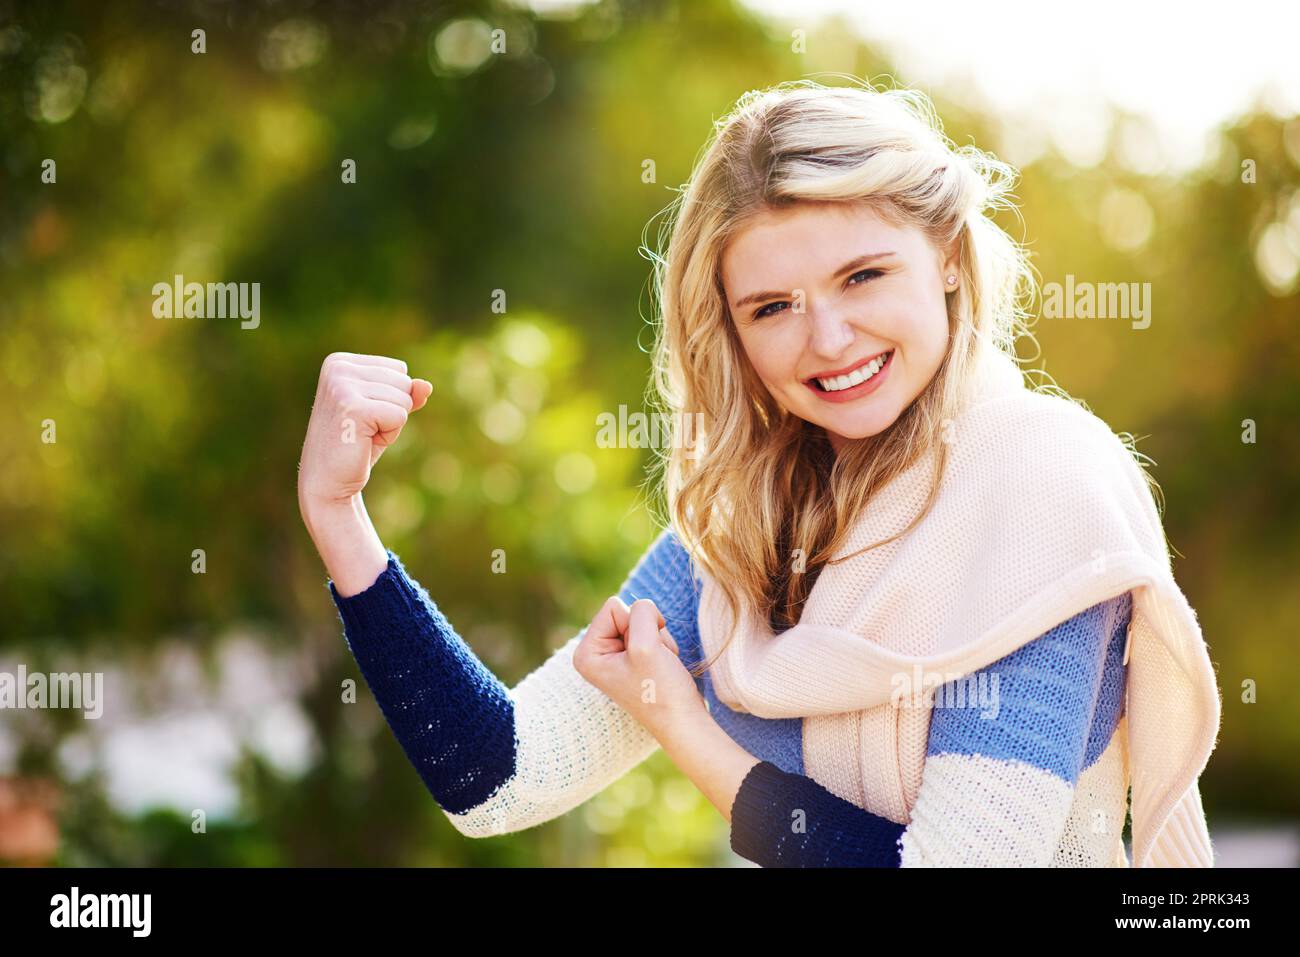 Welcome to the gun show. Cropped portrait of a young woman flexing her bicep outdoors. Stock Photo